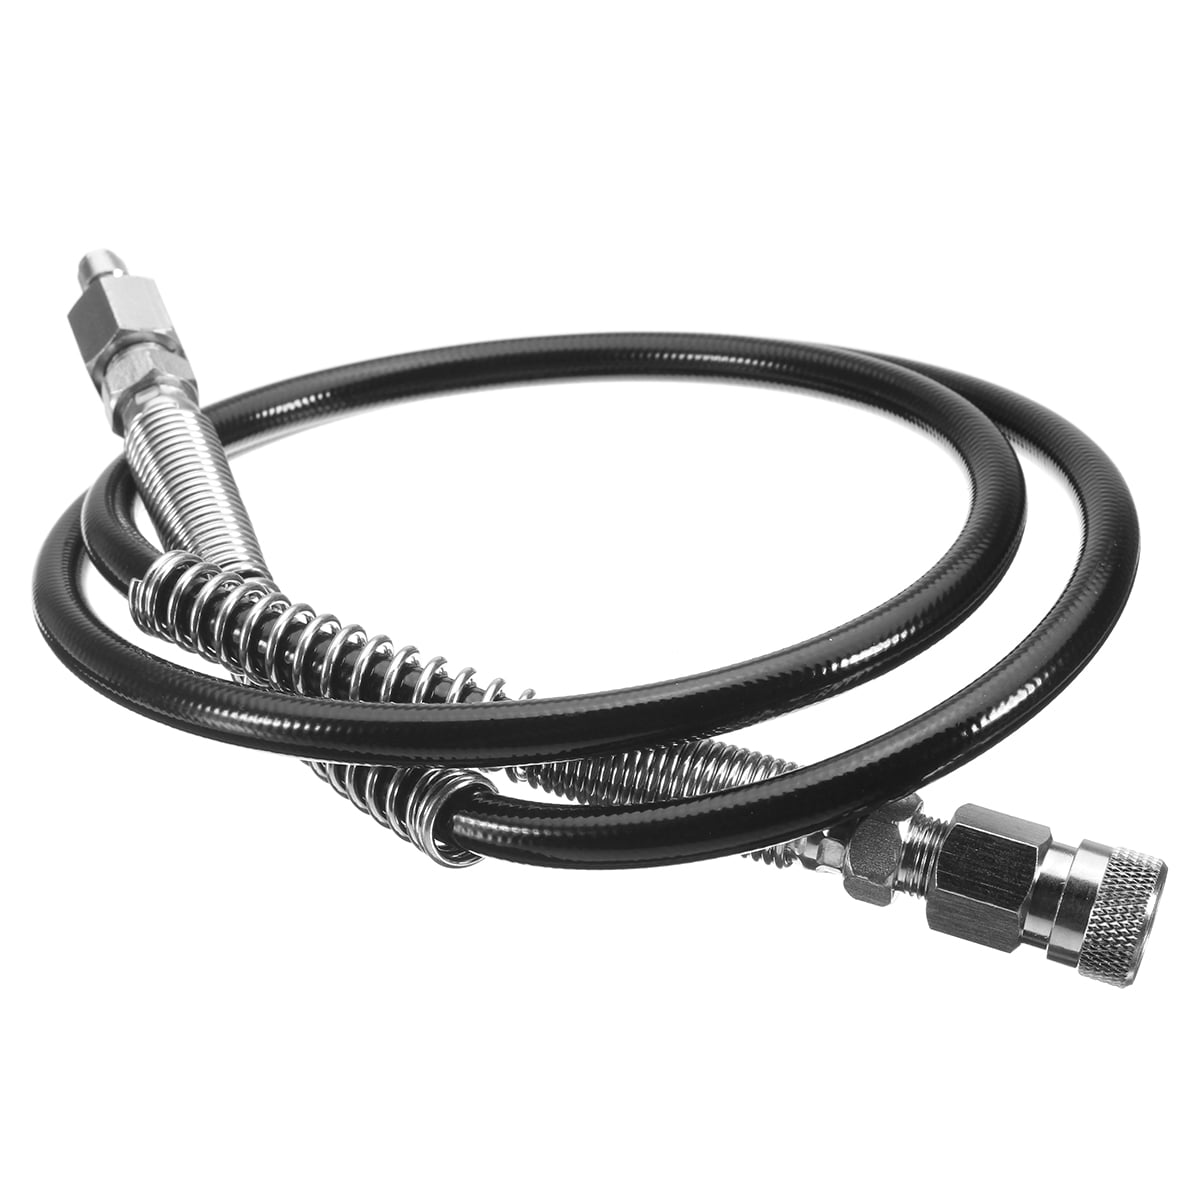 New Paintball PCP Tank High Pressure 36" Hose Line For Air Fill Station,1/8 NPT 